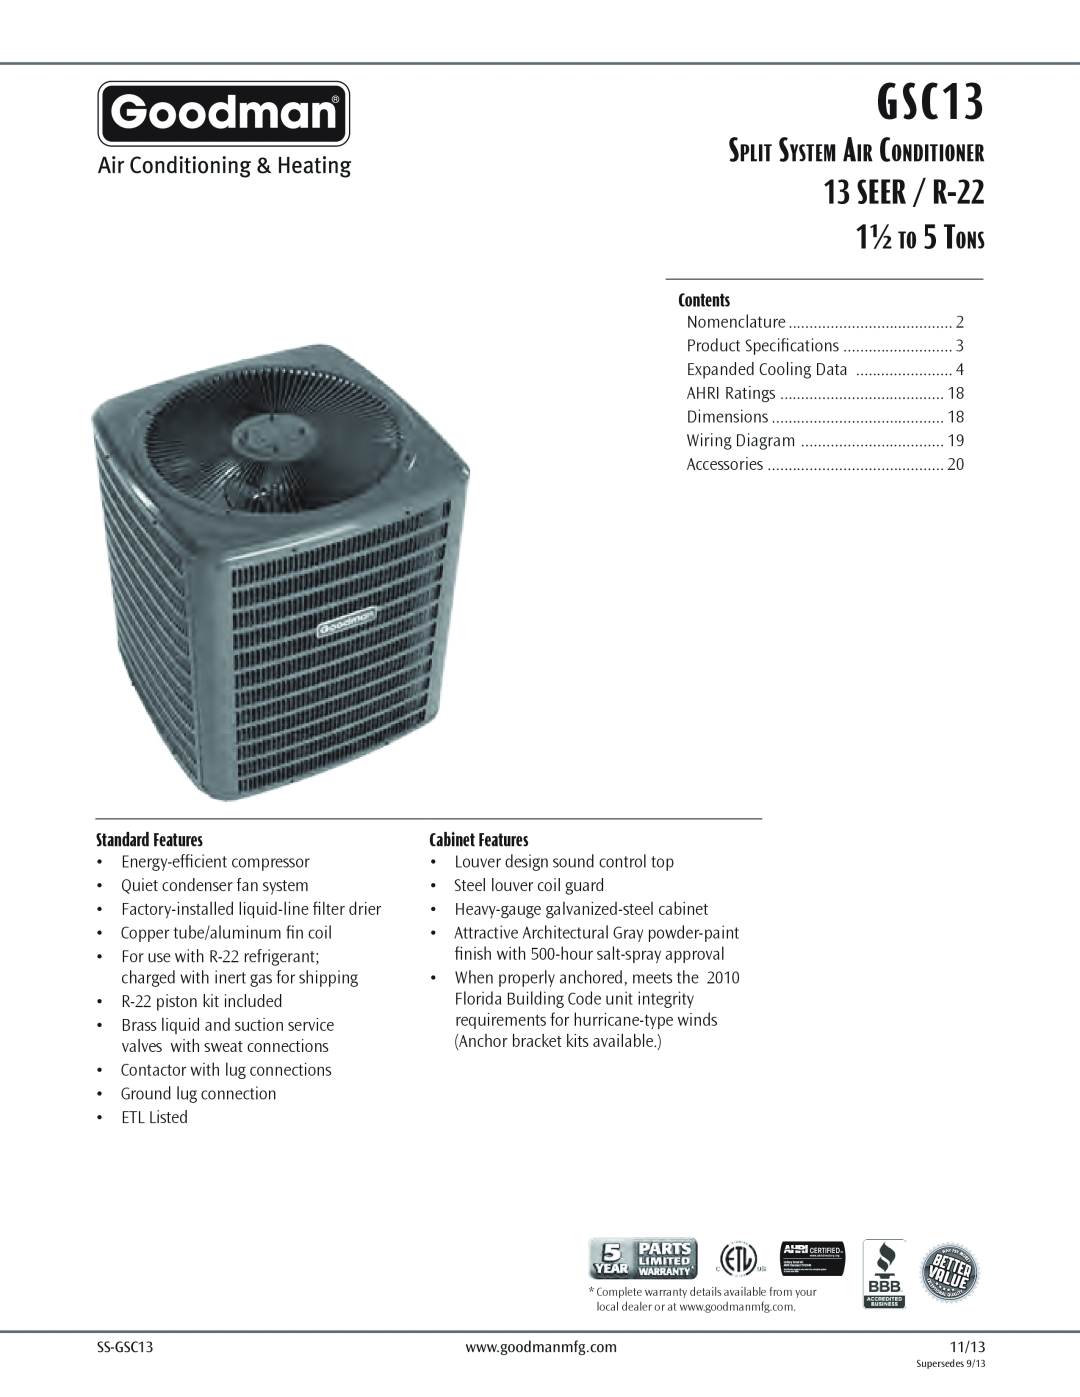 Goodman Mfg Split System Air Conditioner warranty GSC13, SEER / R-22 1½ to 5 Tons, Contents, Standard Features 